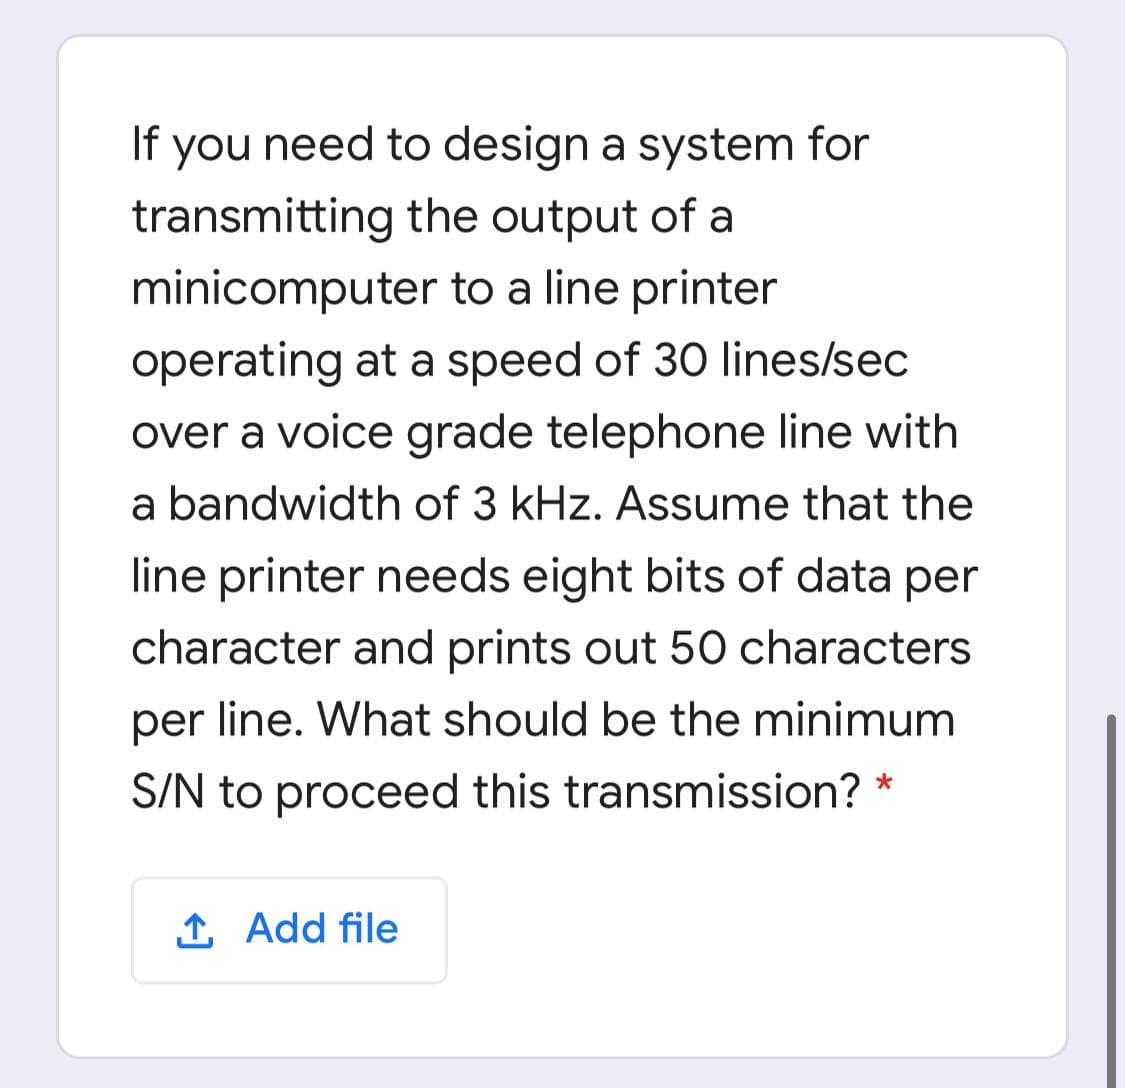 If you need to design a system for
transmitting the output of a
minicomputer to a line printer
operating at a speed of 30 lines/sec
over a voice grade telephone line with
a bandwidth of 3 kHz. Assume that the
line printer needs eight bits of data per
character and prints out 50 characters
per line. What should be the minimum
S/N to proceed this transmission? *
1 Add file
